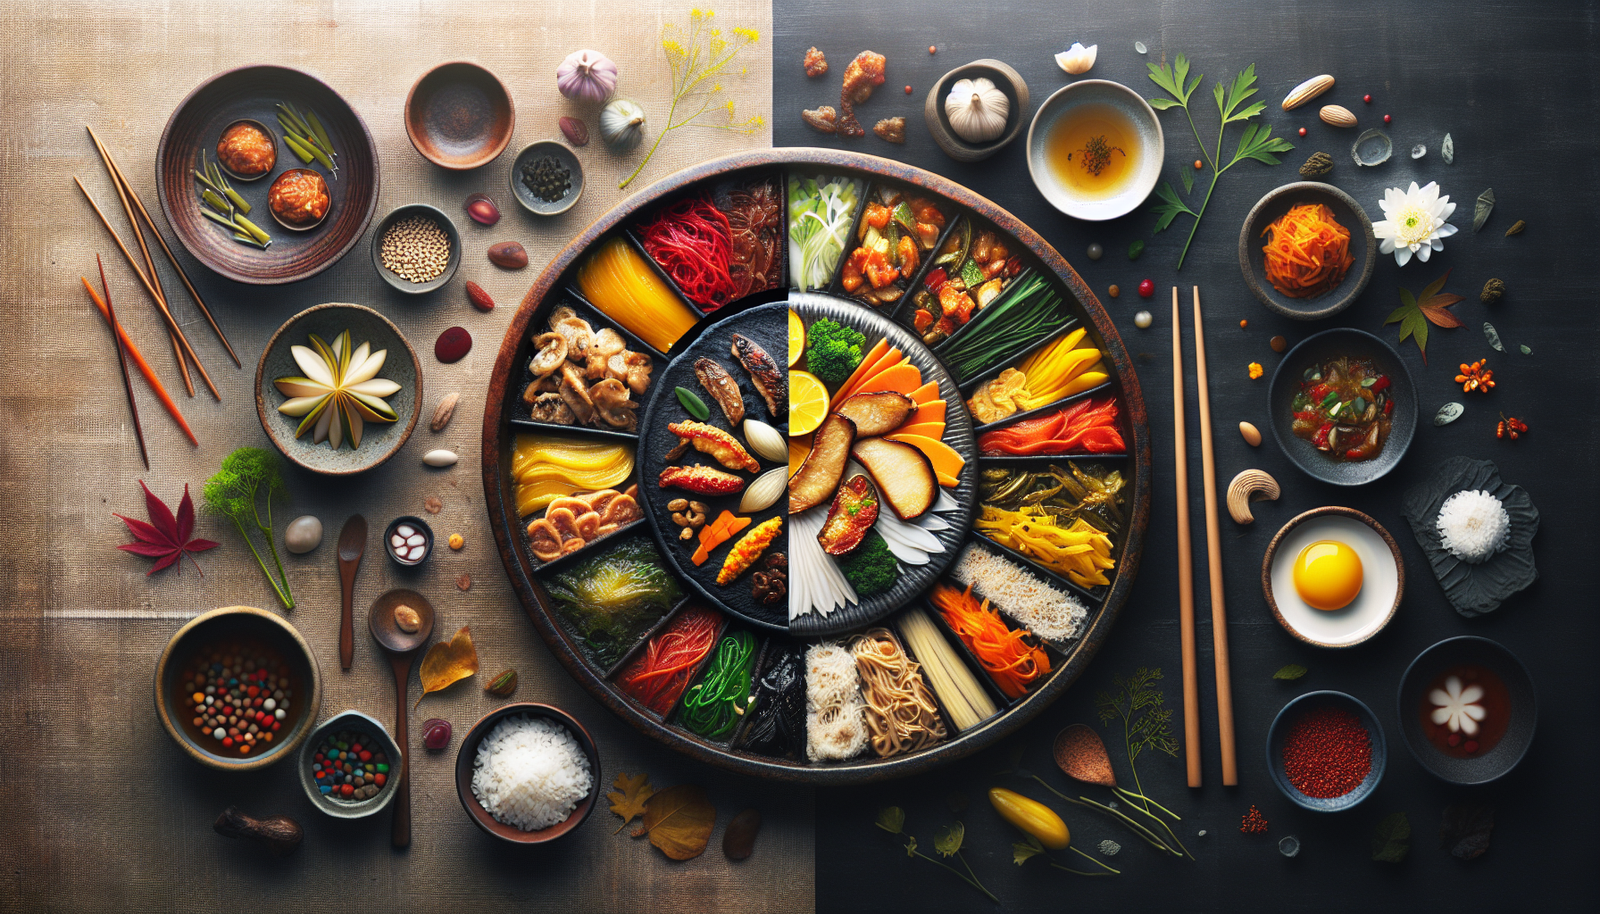 What Are The Key Differences Between North And South Korean Cooking Styles?